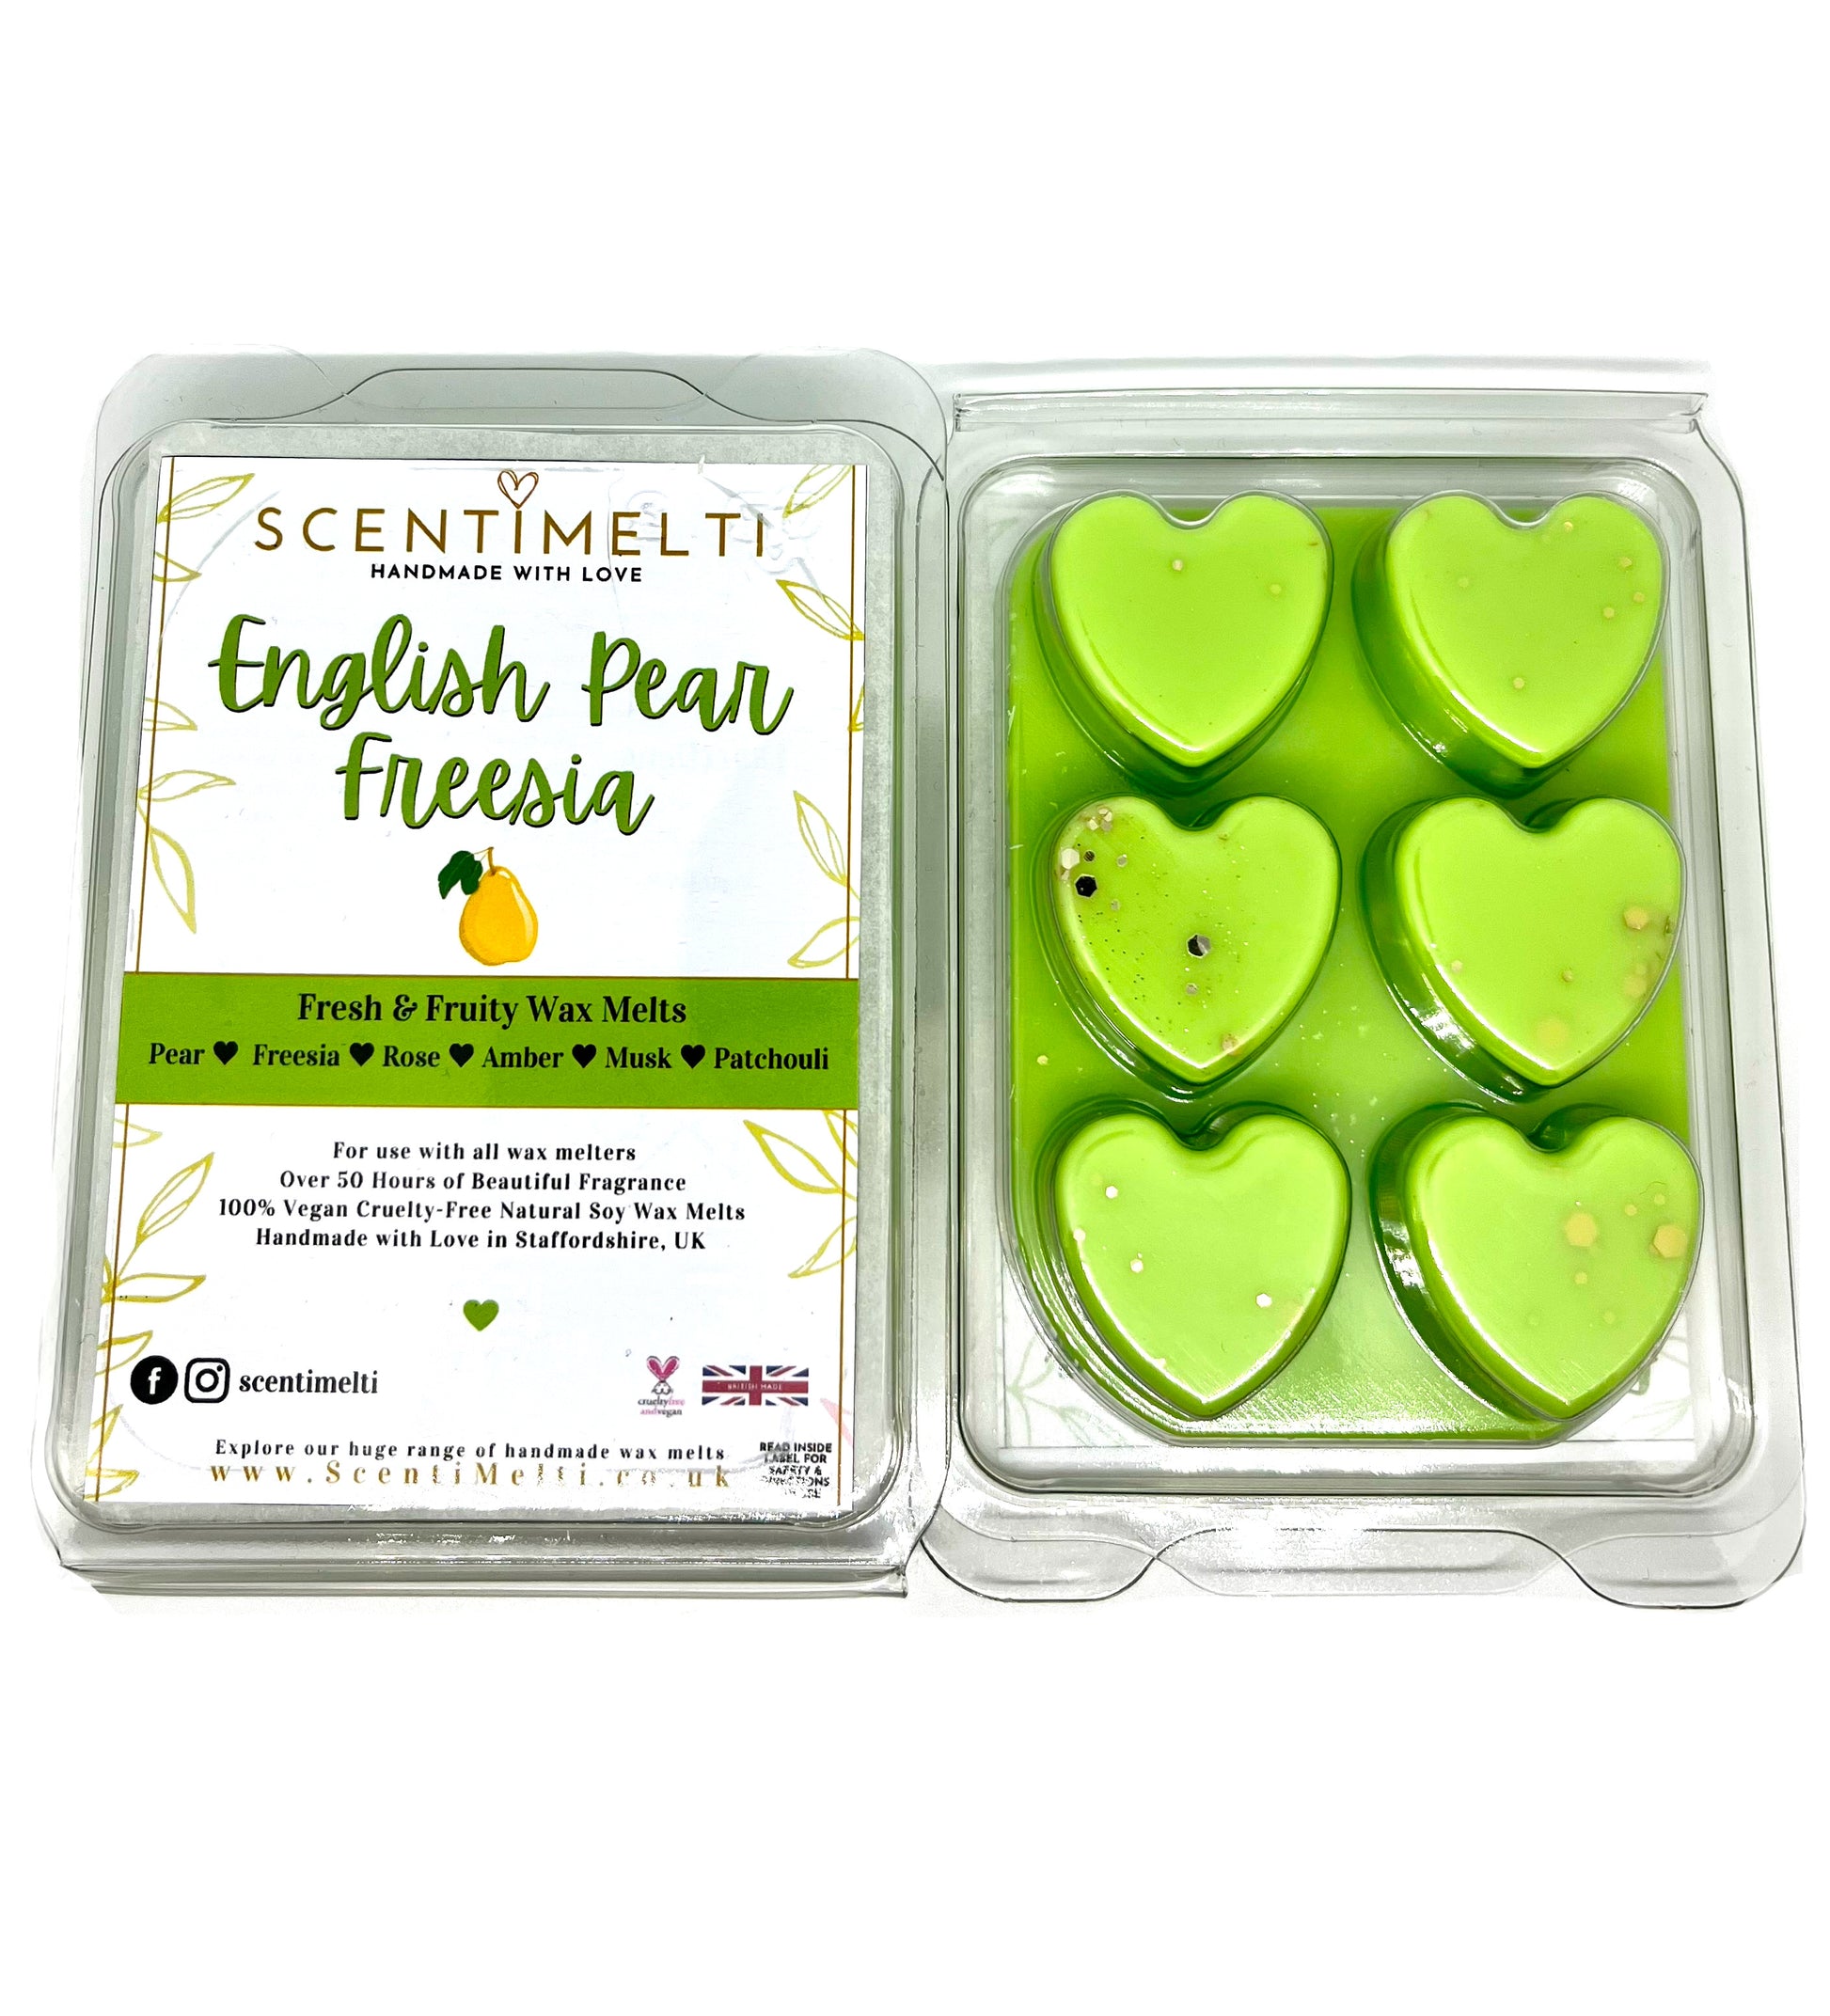 English Pear & Freesia Wax Melts Inspired by JM - ScentiMelti  English Pear & Freesia Wax Melts Inspired by JM